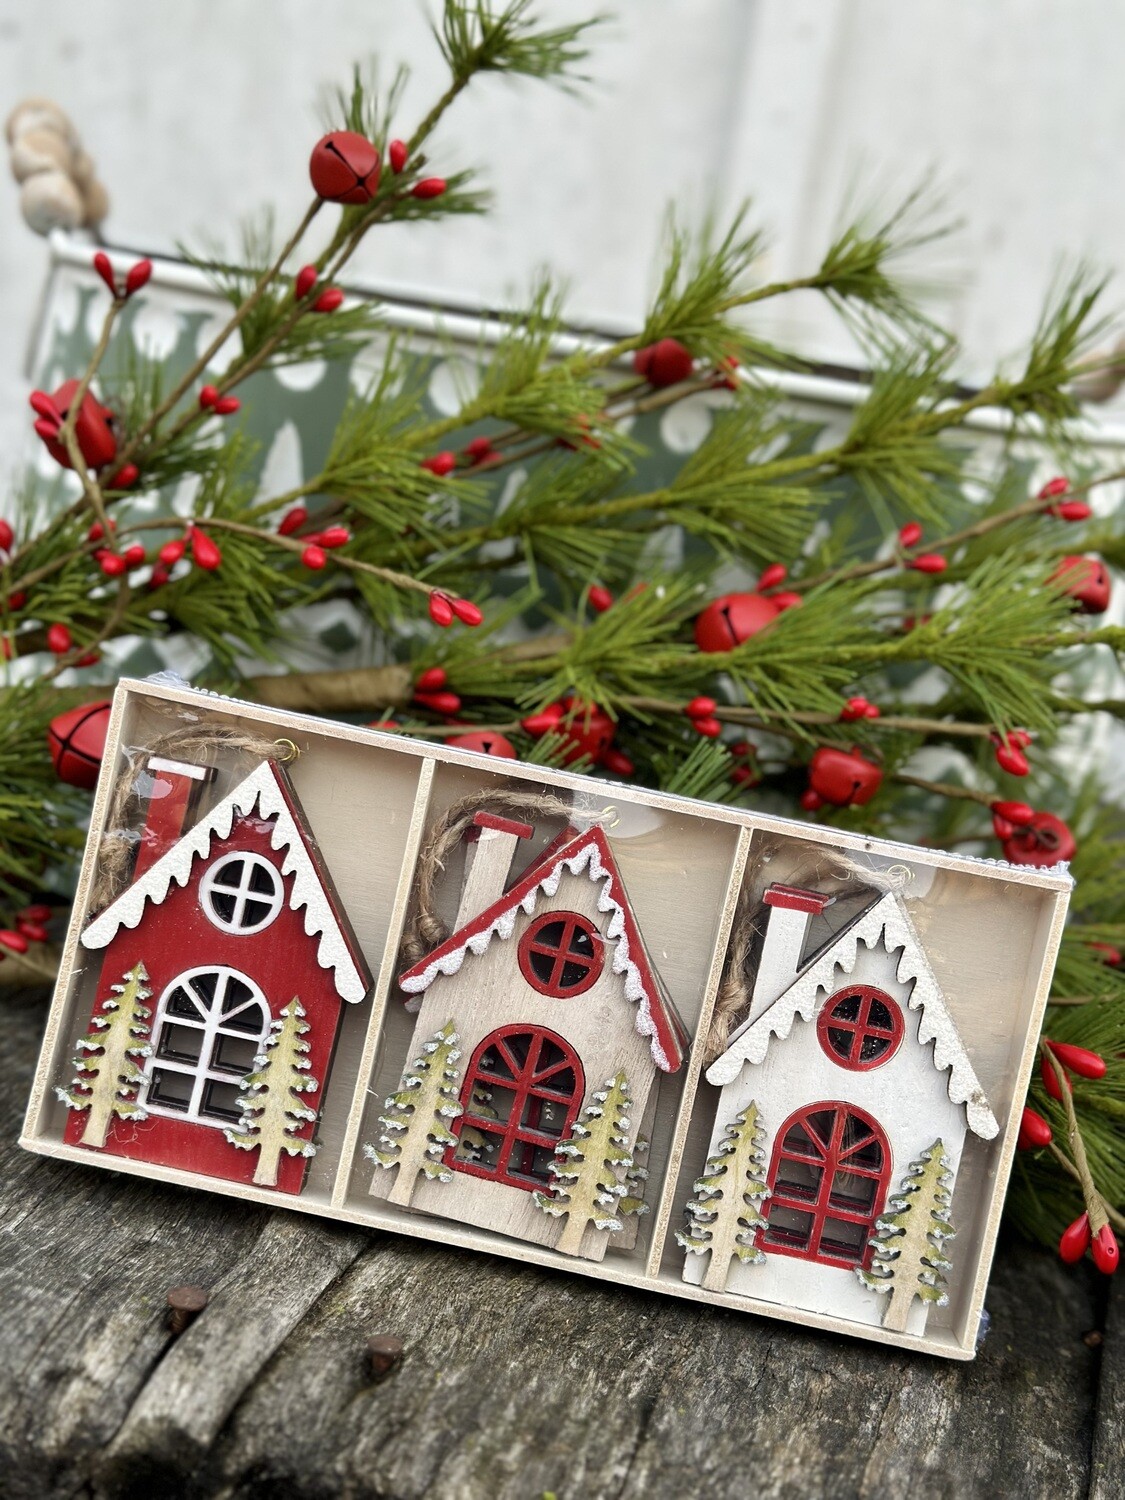 6 Pack of House Ornaments